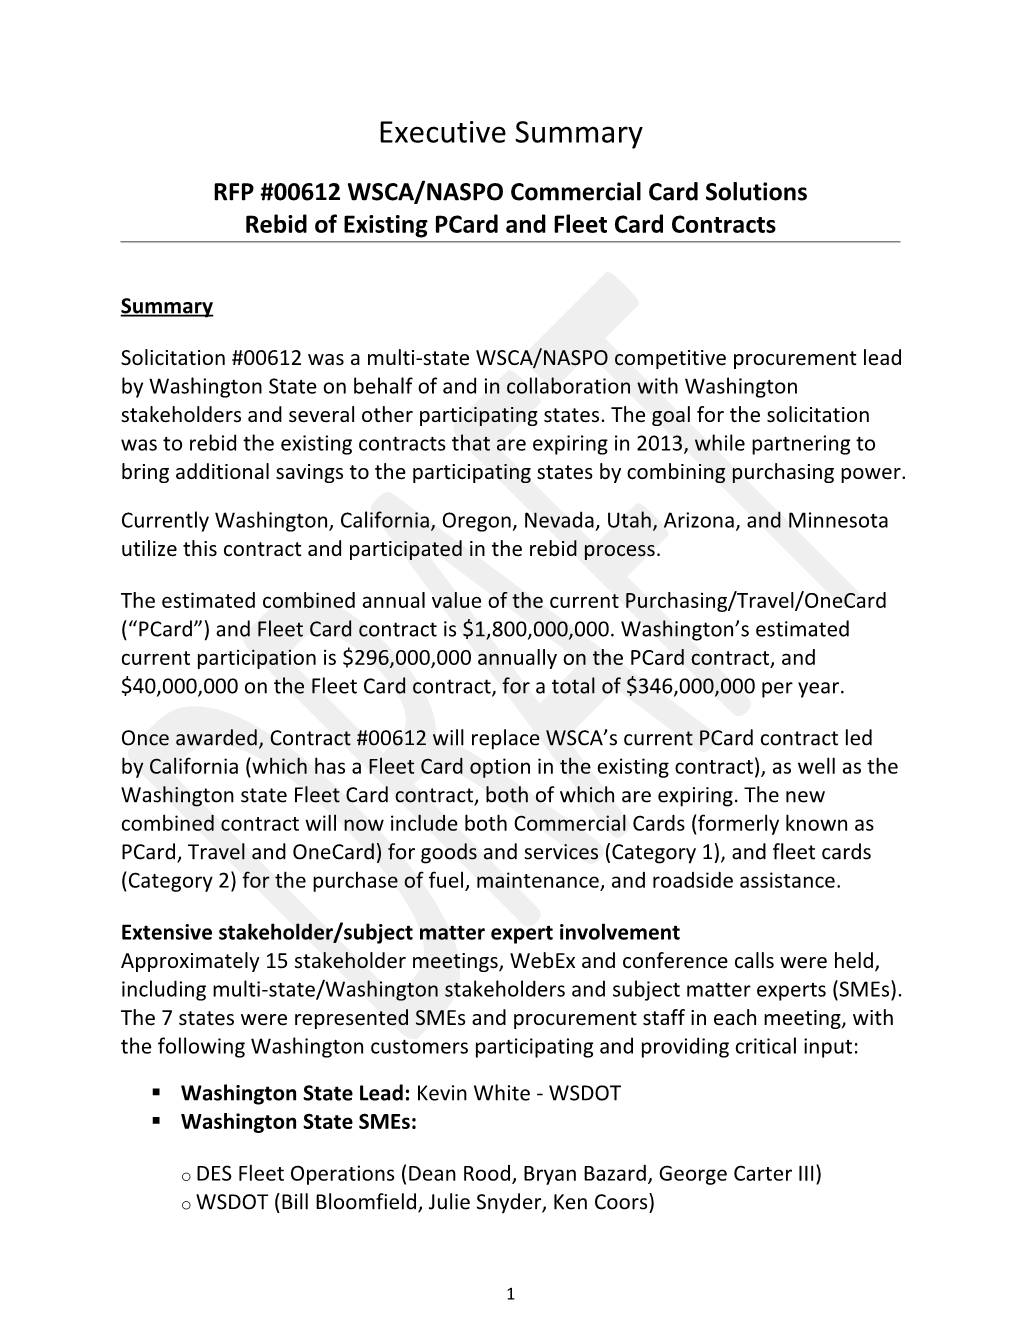 RFP #00612 WSCA/NASPO Commercial Card Solutions